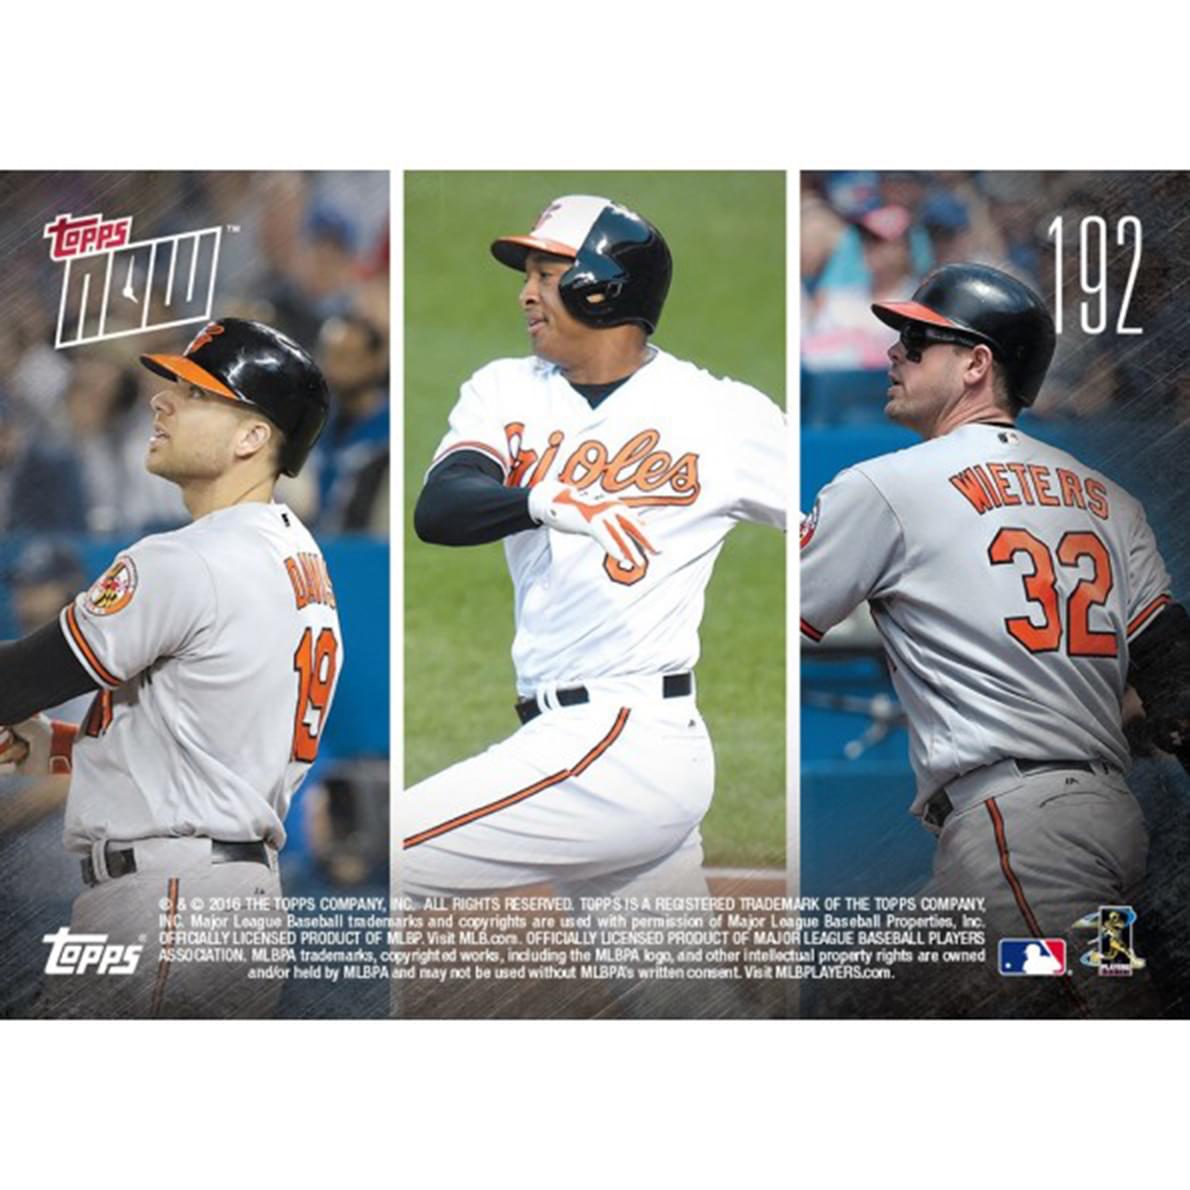 Baltimore Orioles MLB 2016 Topps NOW Dual-Sided Card 192